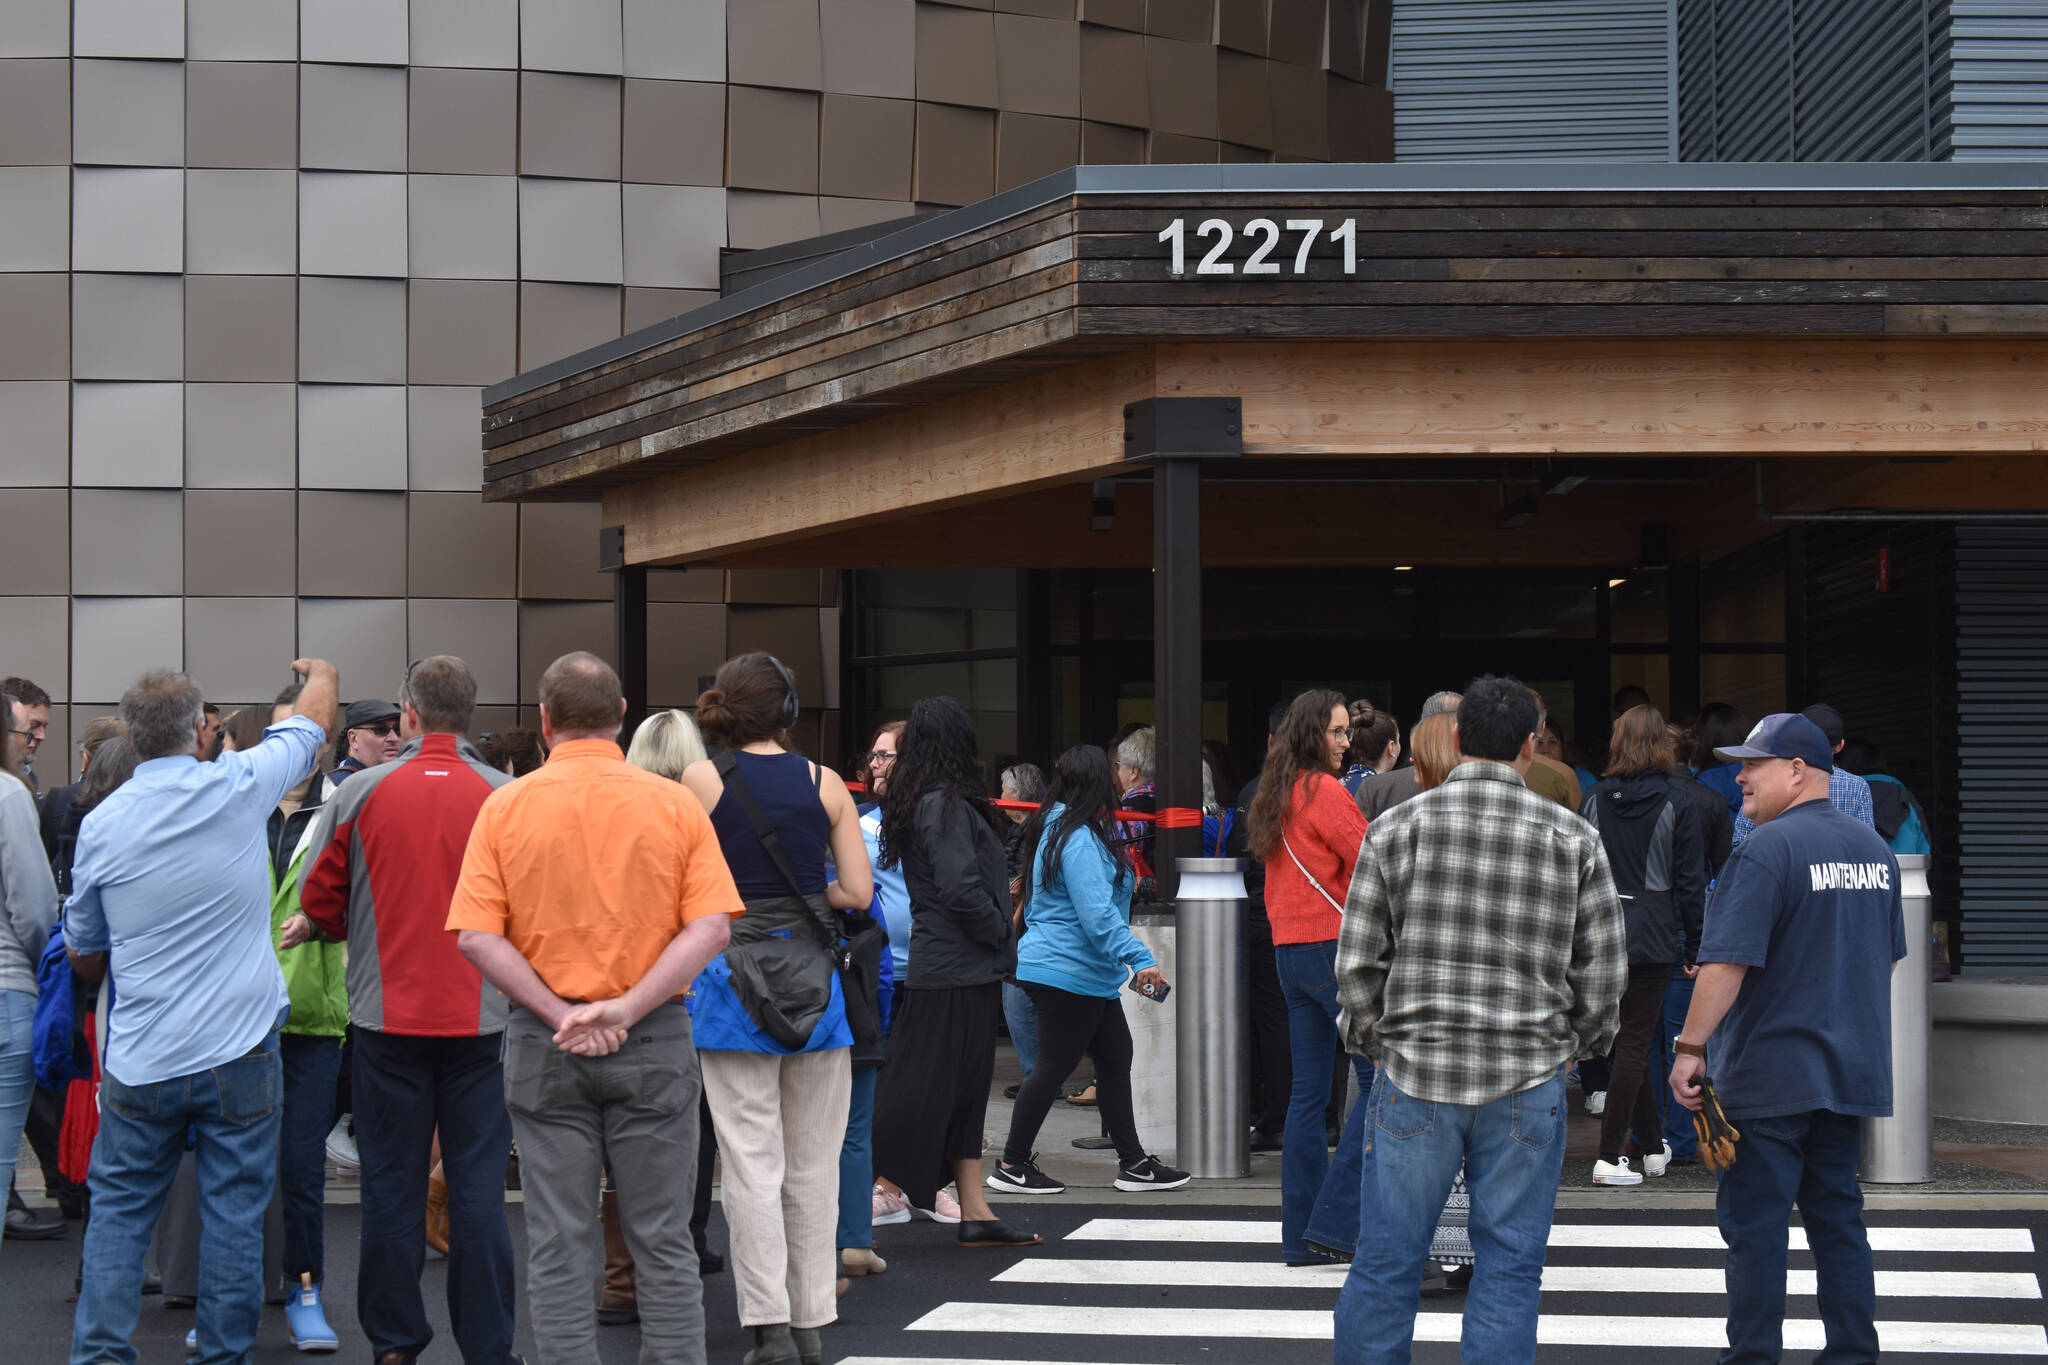 Members of the public and staff wait to enter the Kahtnuht’ana Duhdeldiht Campus during an opening ceremony in Kenai, Alaska on Thursday, Sept. 1, 2022. (Jake Dye/Peninsula Clarion)